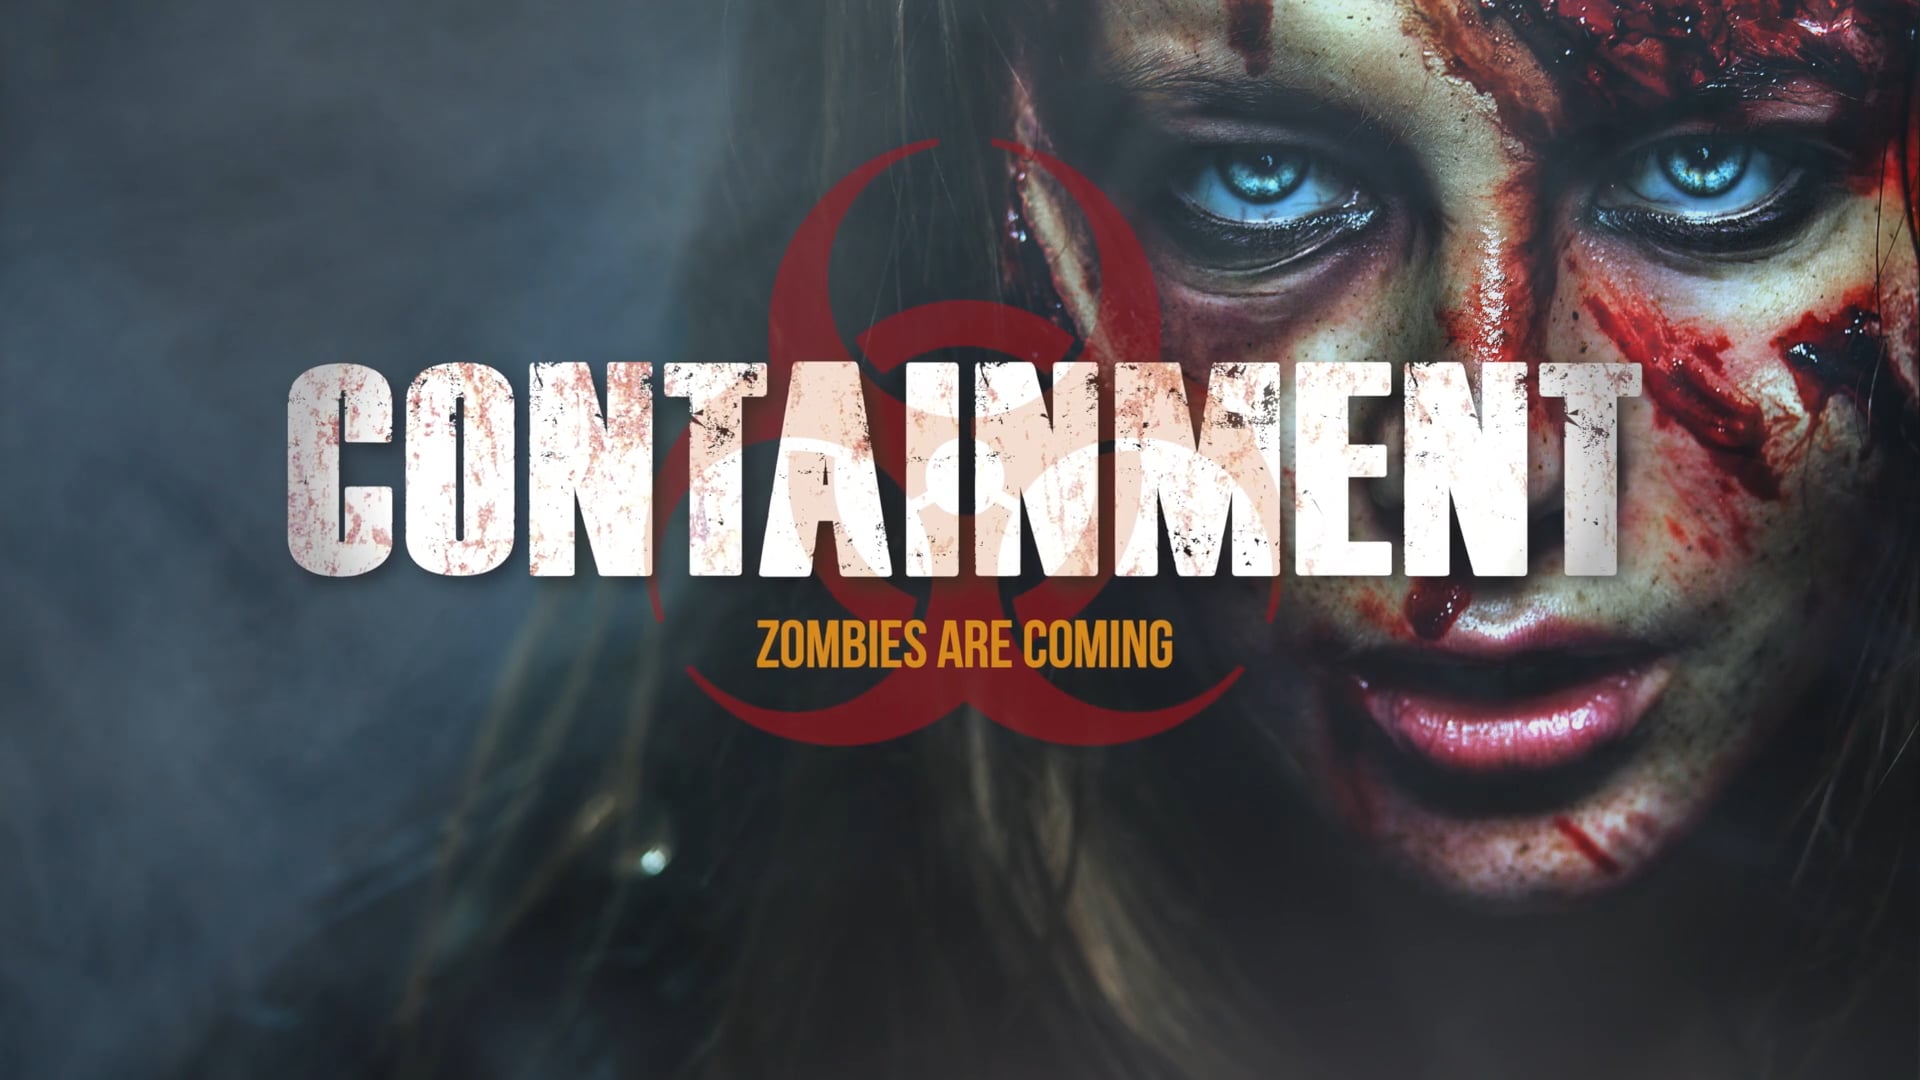 Containment is coming to the The Brisbane Powerhouse